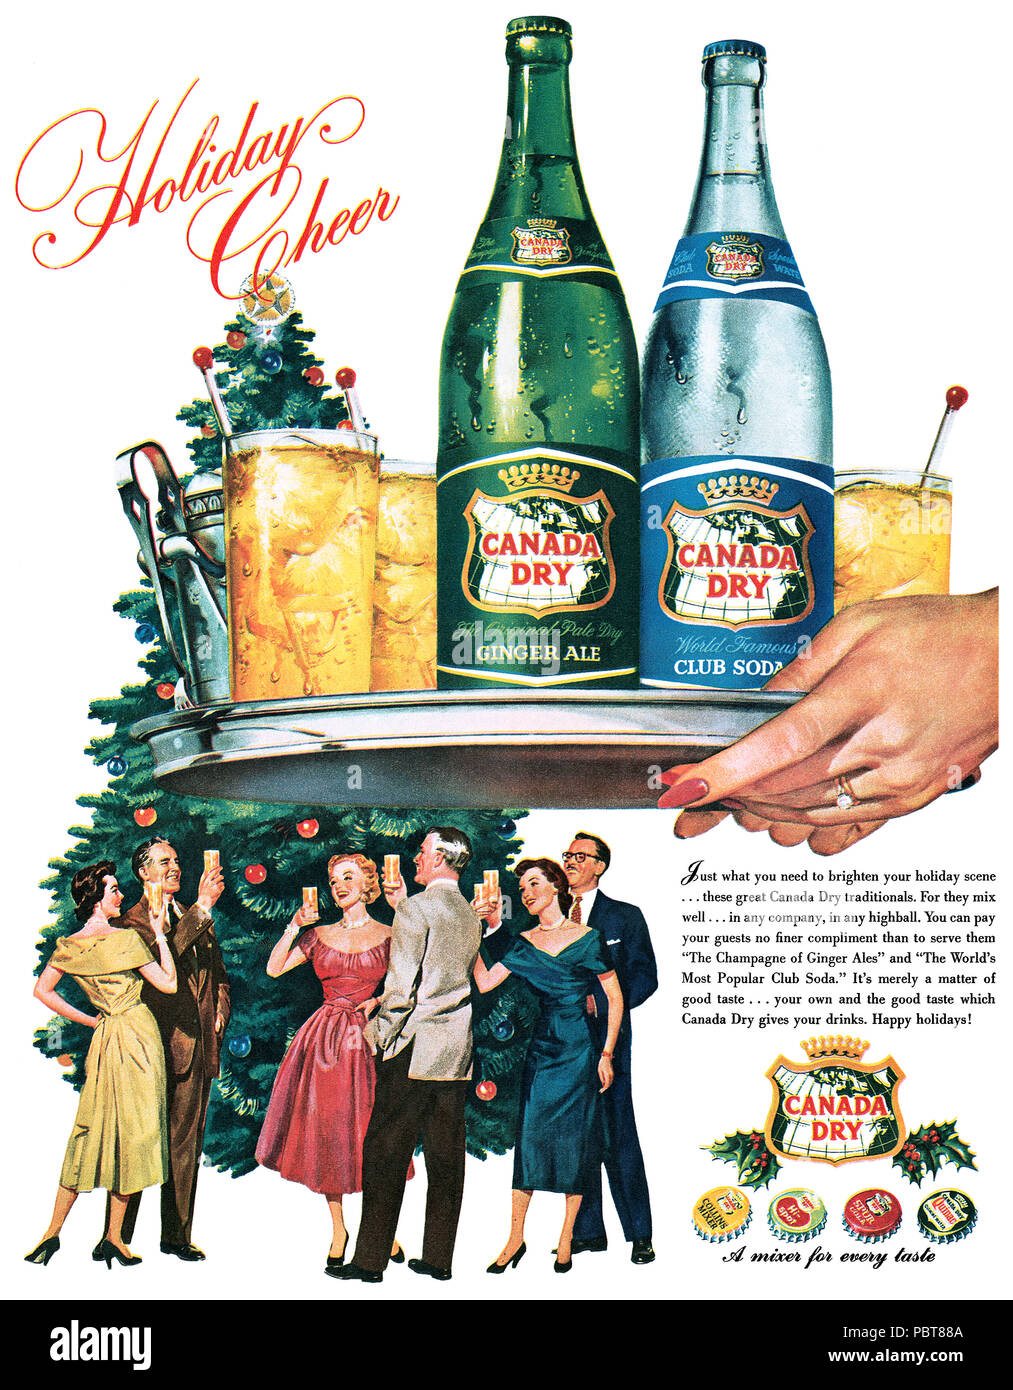 1954 U.S. Christmas advertisement for Canada Dry ginger ale and club soda. Stock Photo